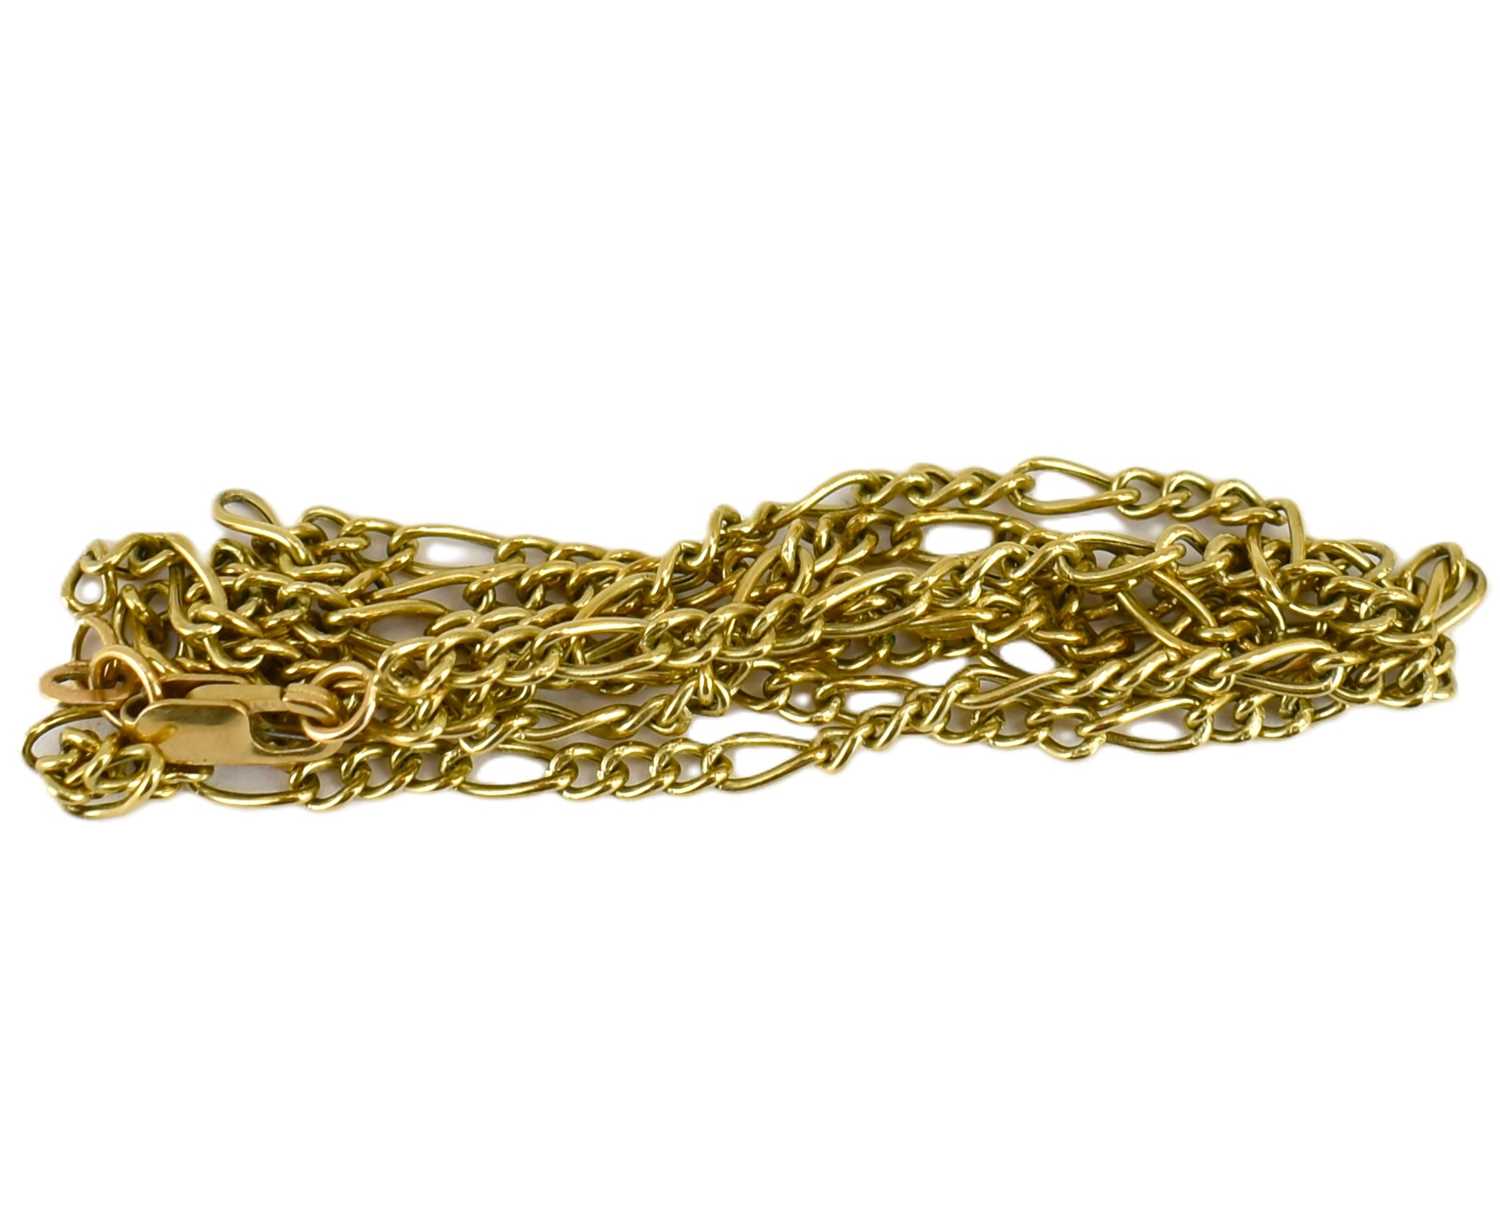 A 9ct gold Figaro link necklace with lobster claw clasp, length 44cm, approx. 2.4g. - Image 2 of 2